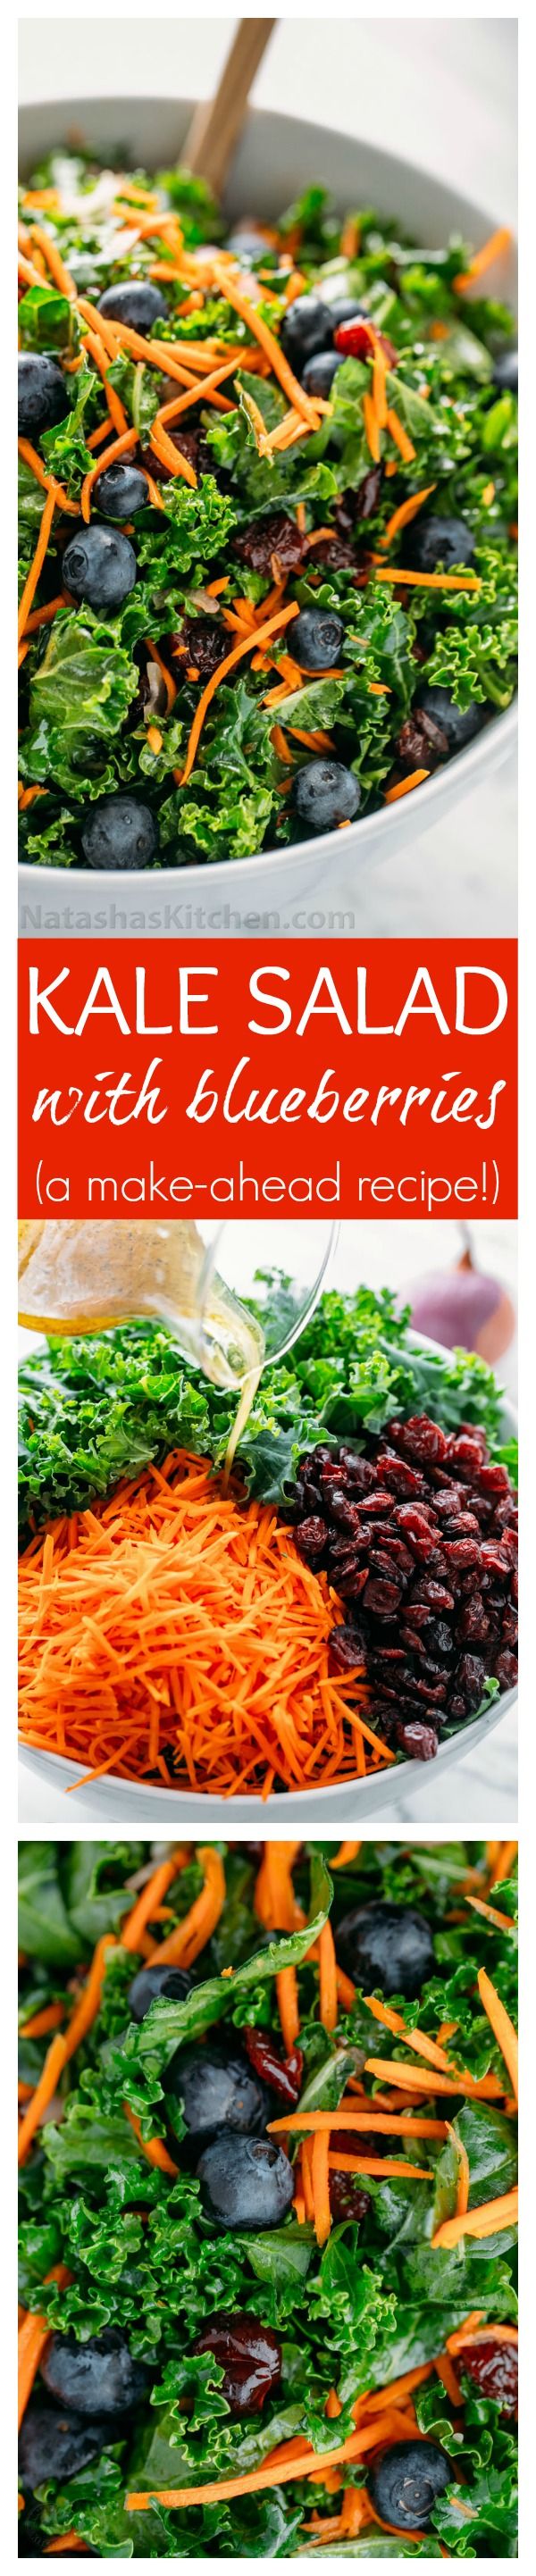 Kale Salad with Blueberries (make-ahead